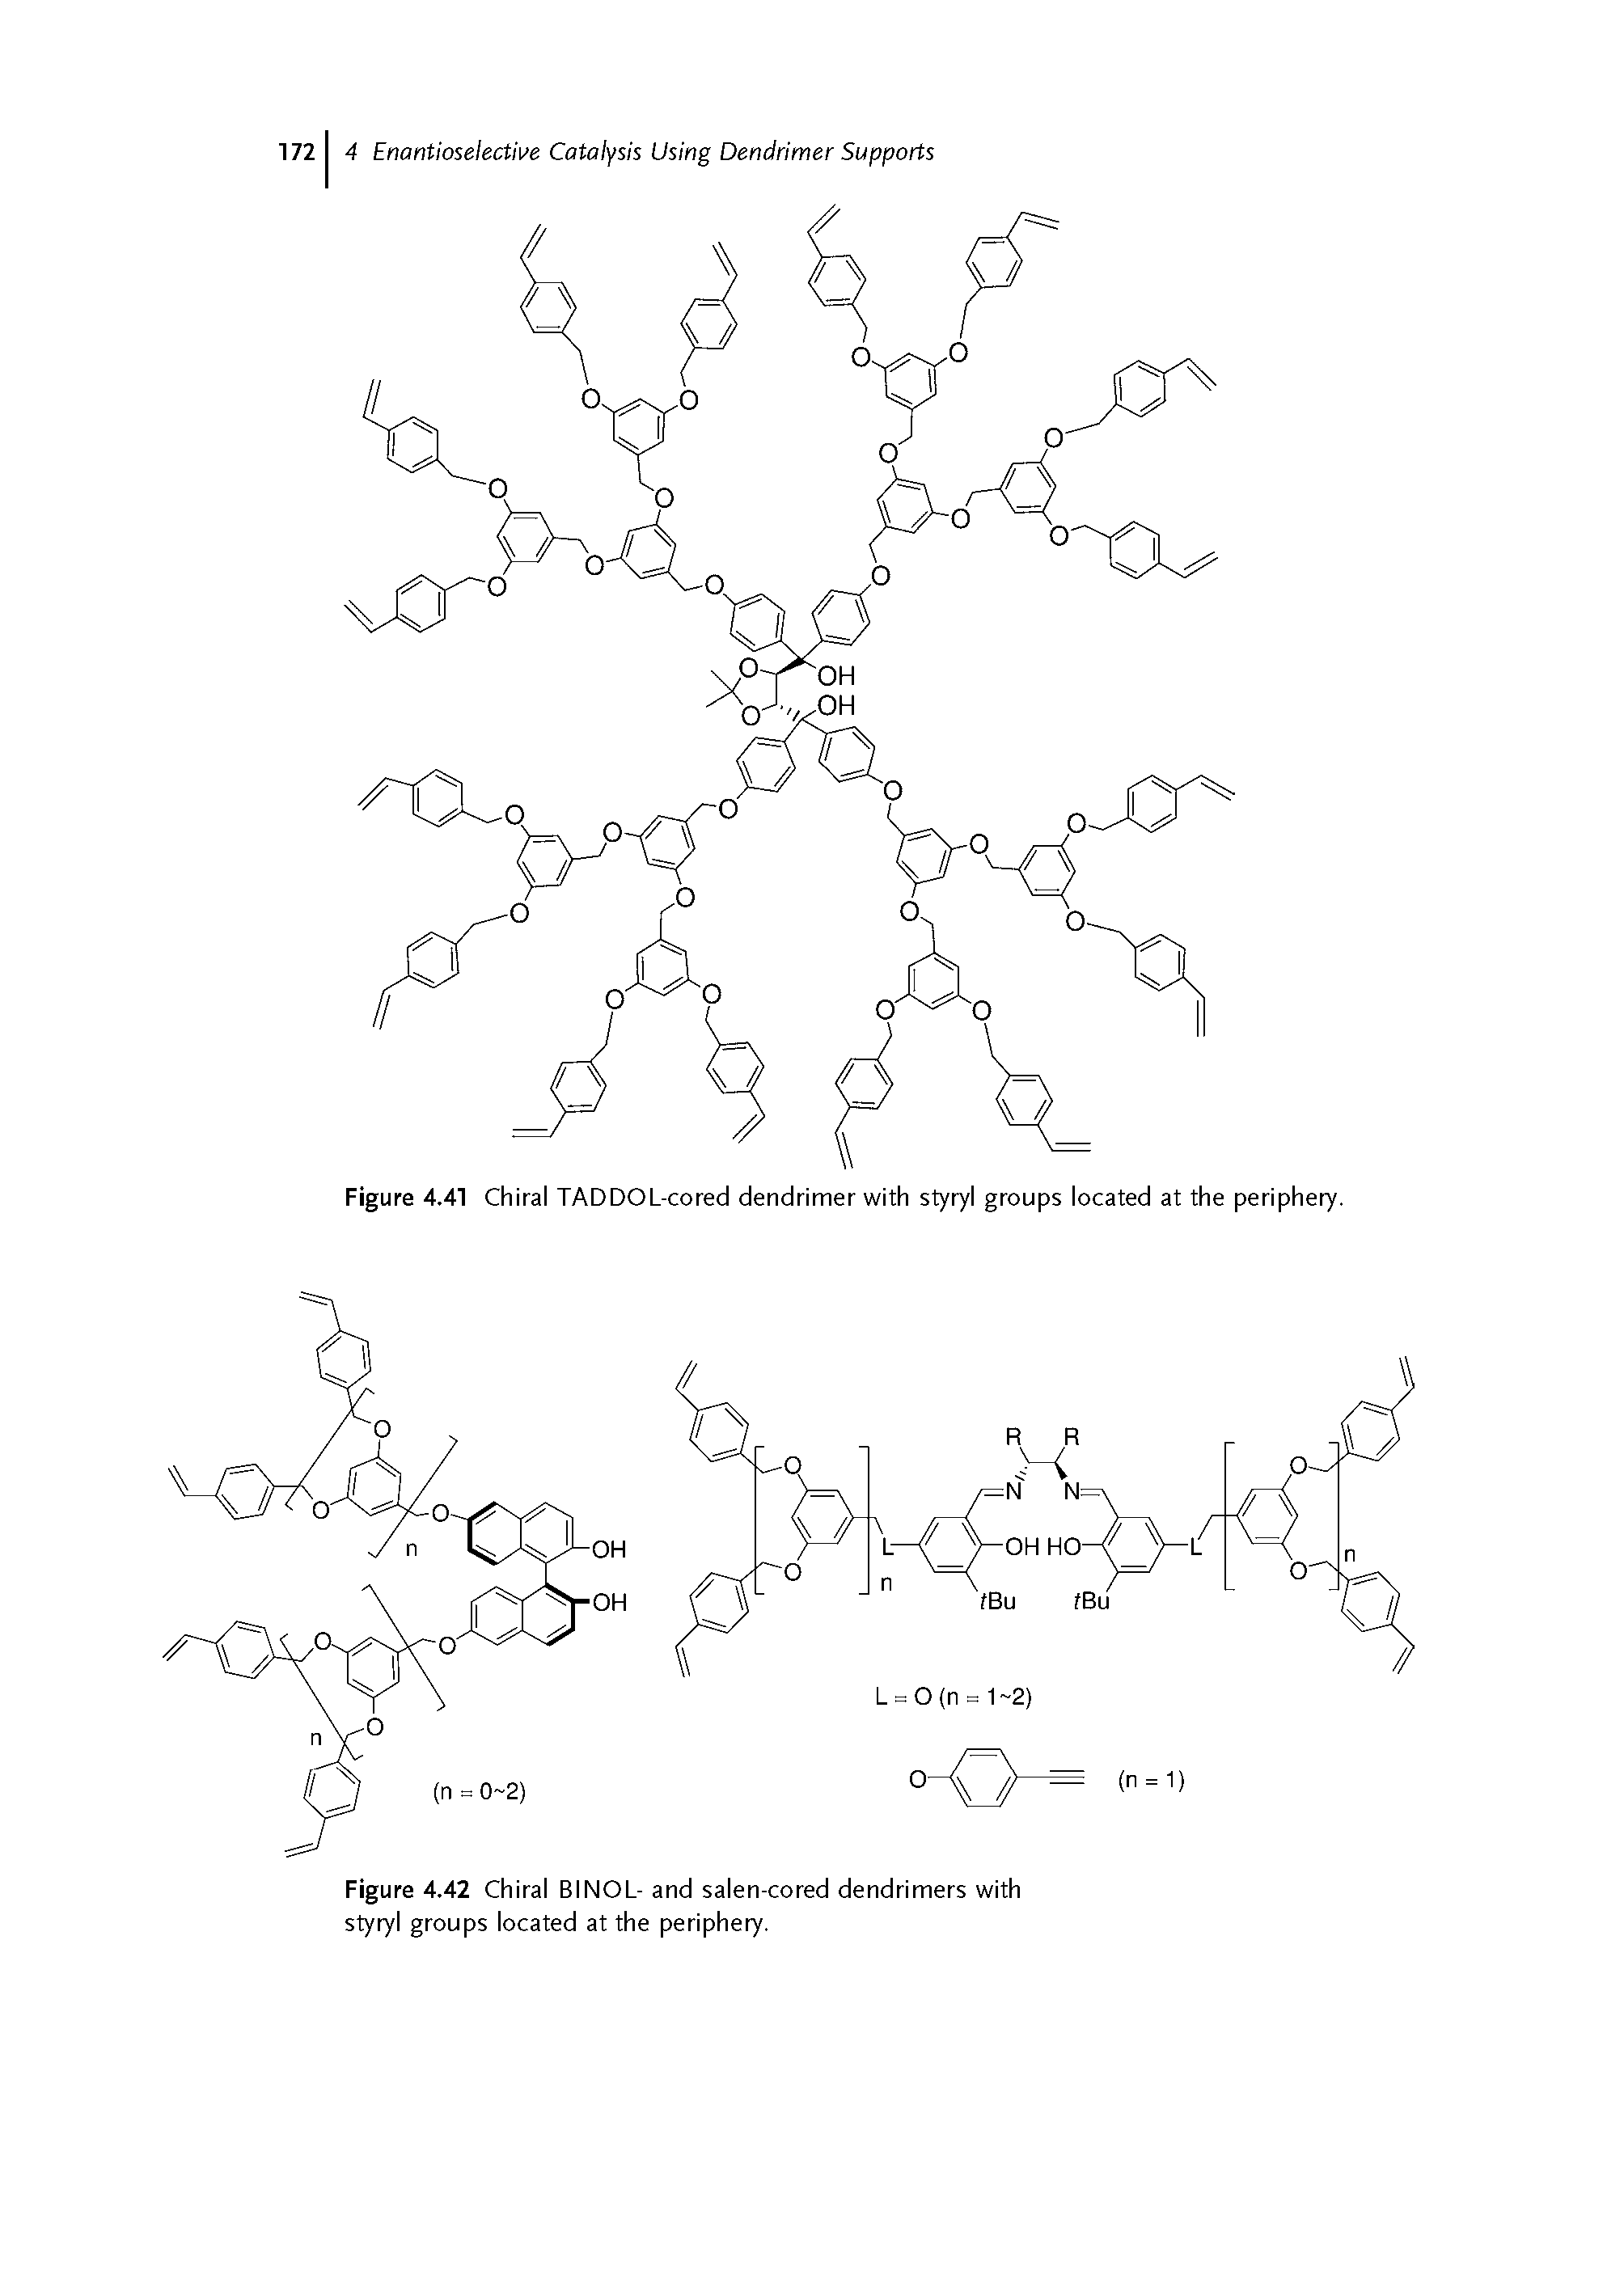 Figure 4.42 Chiral BINOL- and salen-cored dendrimers with styryl groups located at the periphery.